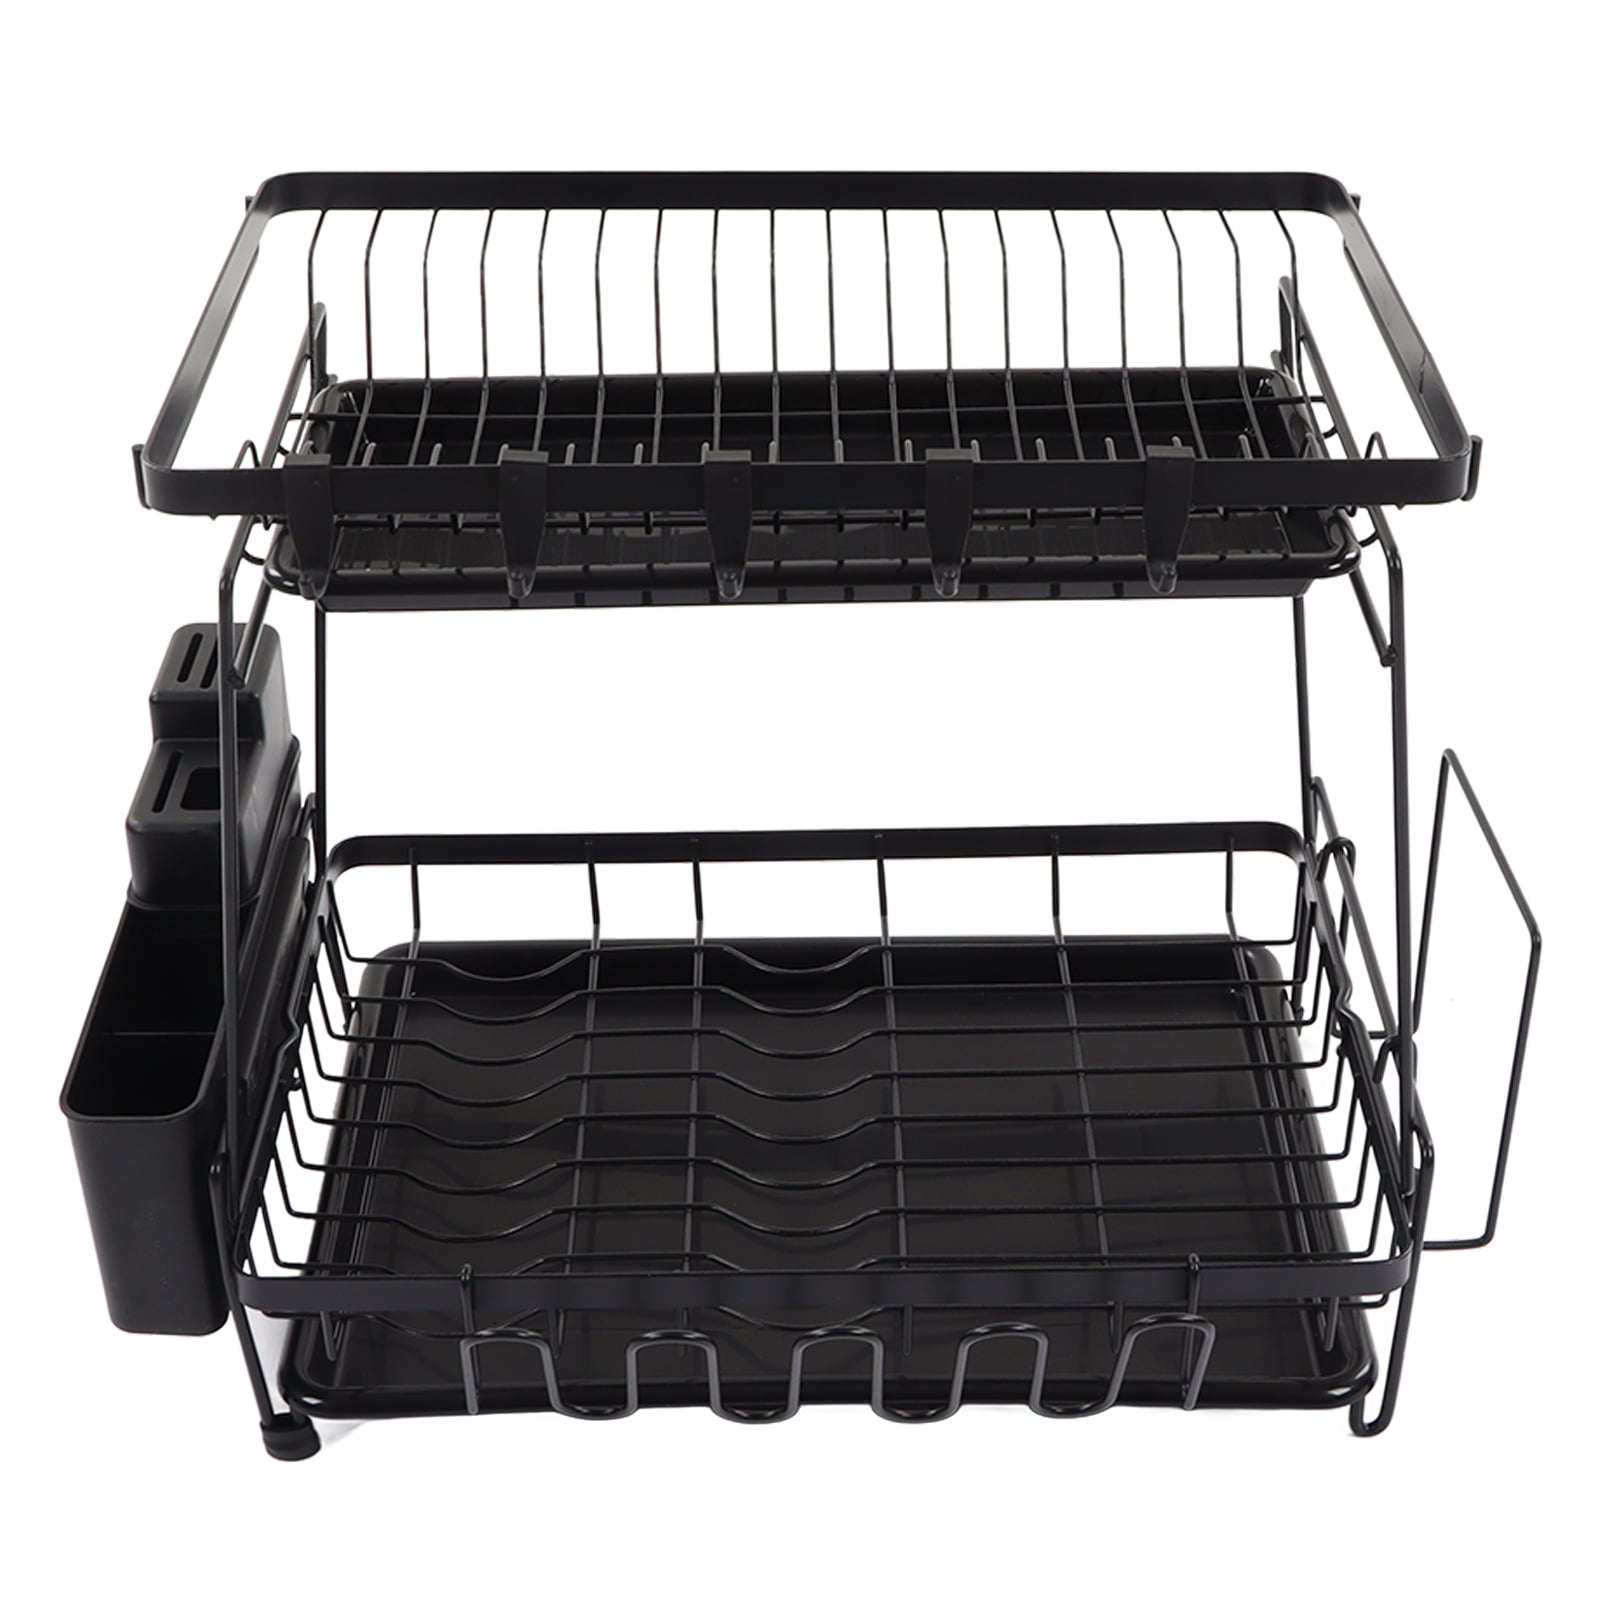 Dish Drying Rack, Majalis Stainless Steel Rustproof Dish Rack, with  Drainboard and Wine Glass Rack, Dish Drainers for Kitchen Counter(2 Tier,  Black)